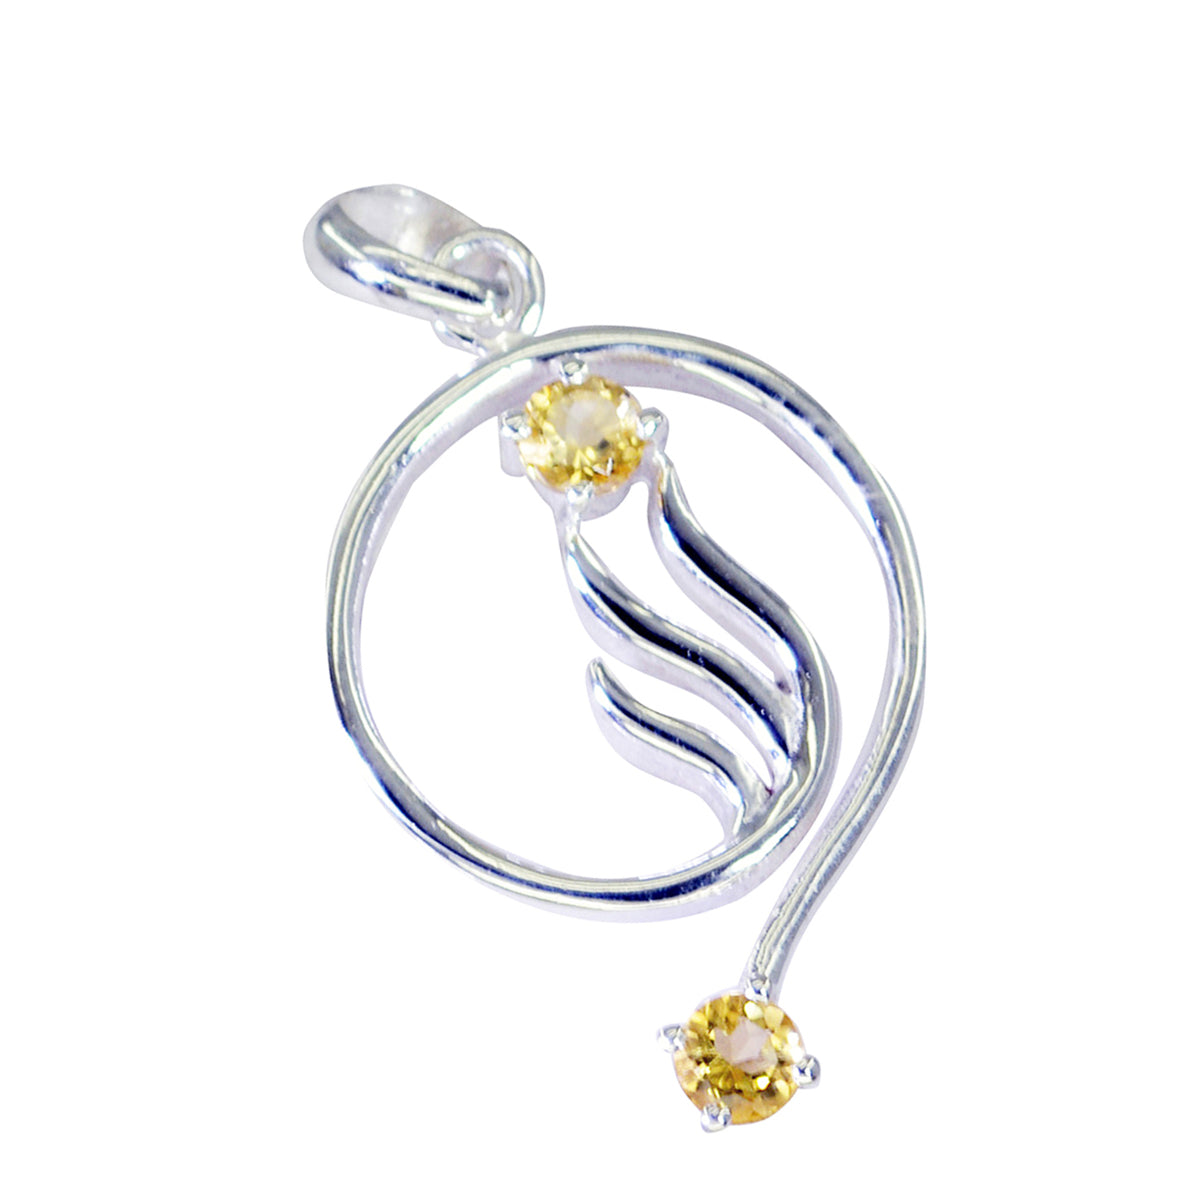 Riyo Good Gems Round Faceted Yellow Citrine Solid Silver Pendant Gift For Good Friday